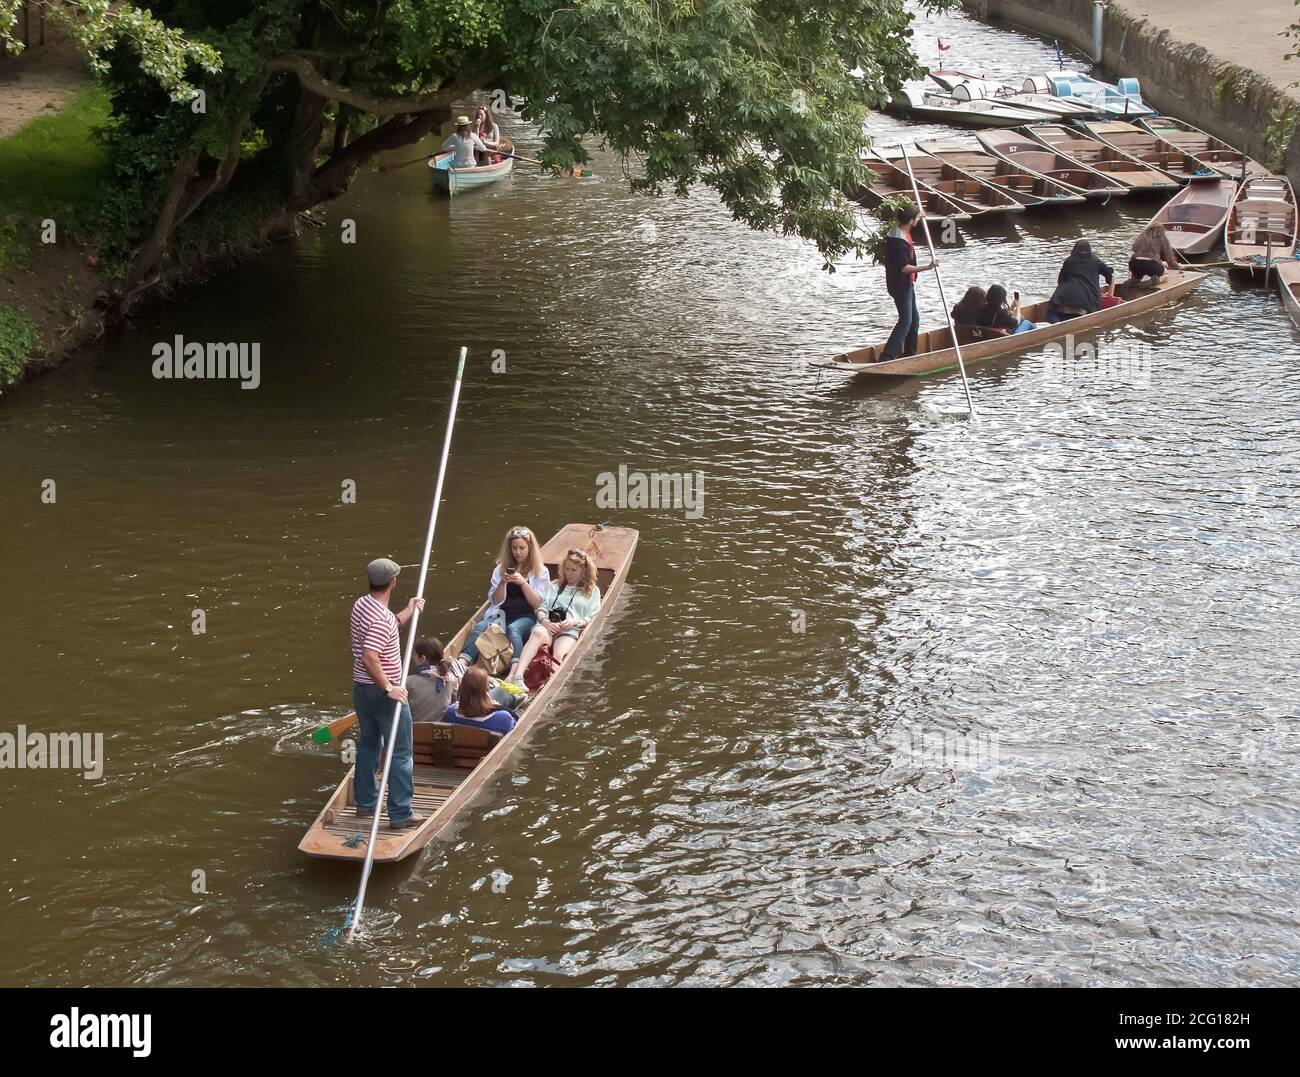 Punting on the River in Oxford, England, Vereinigtes Königreich Stockfoto